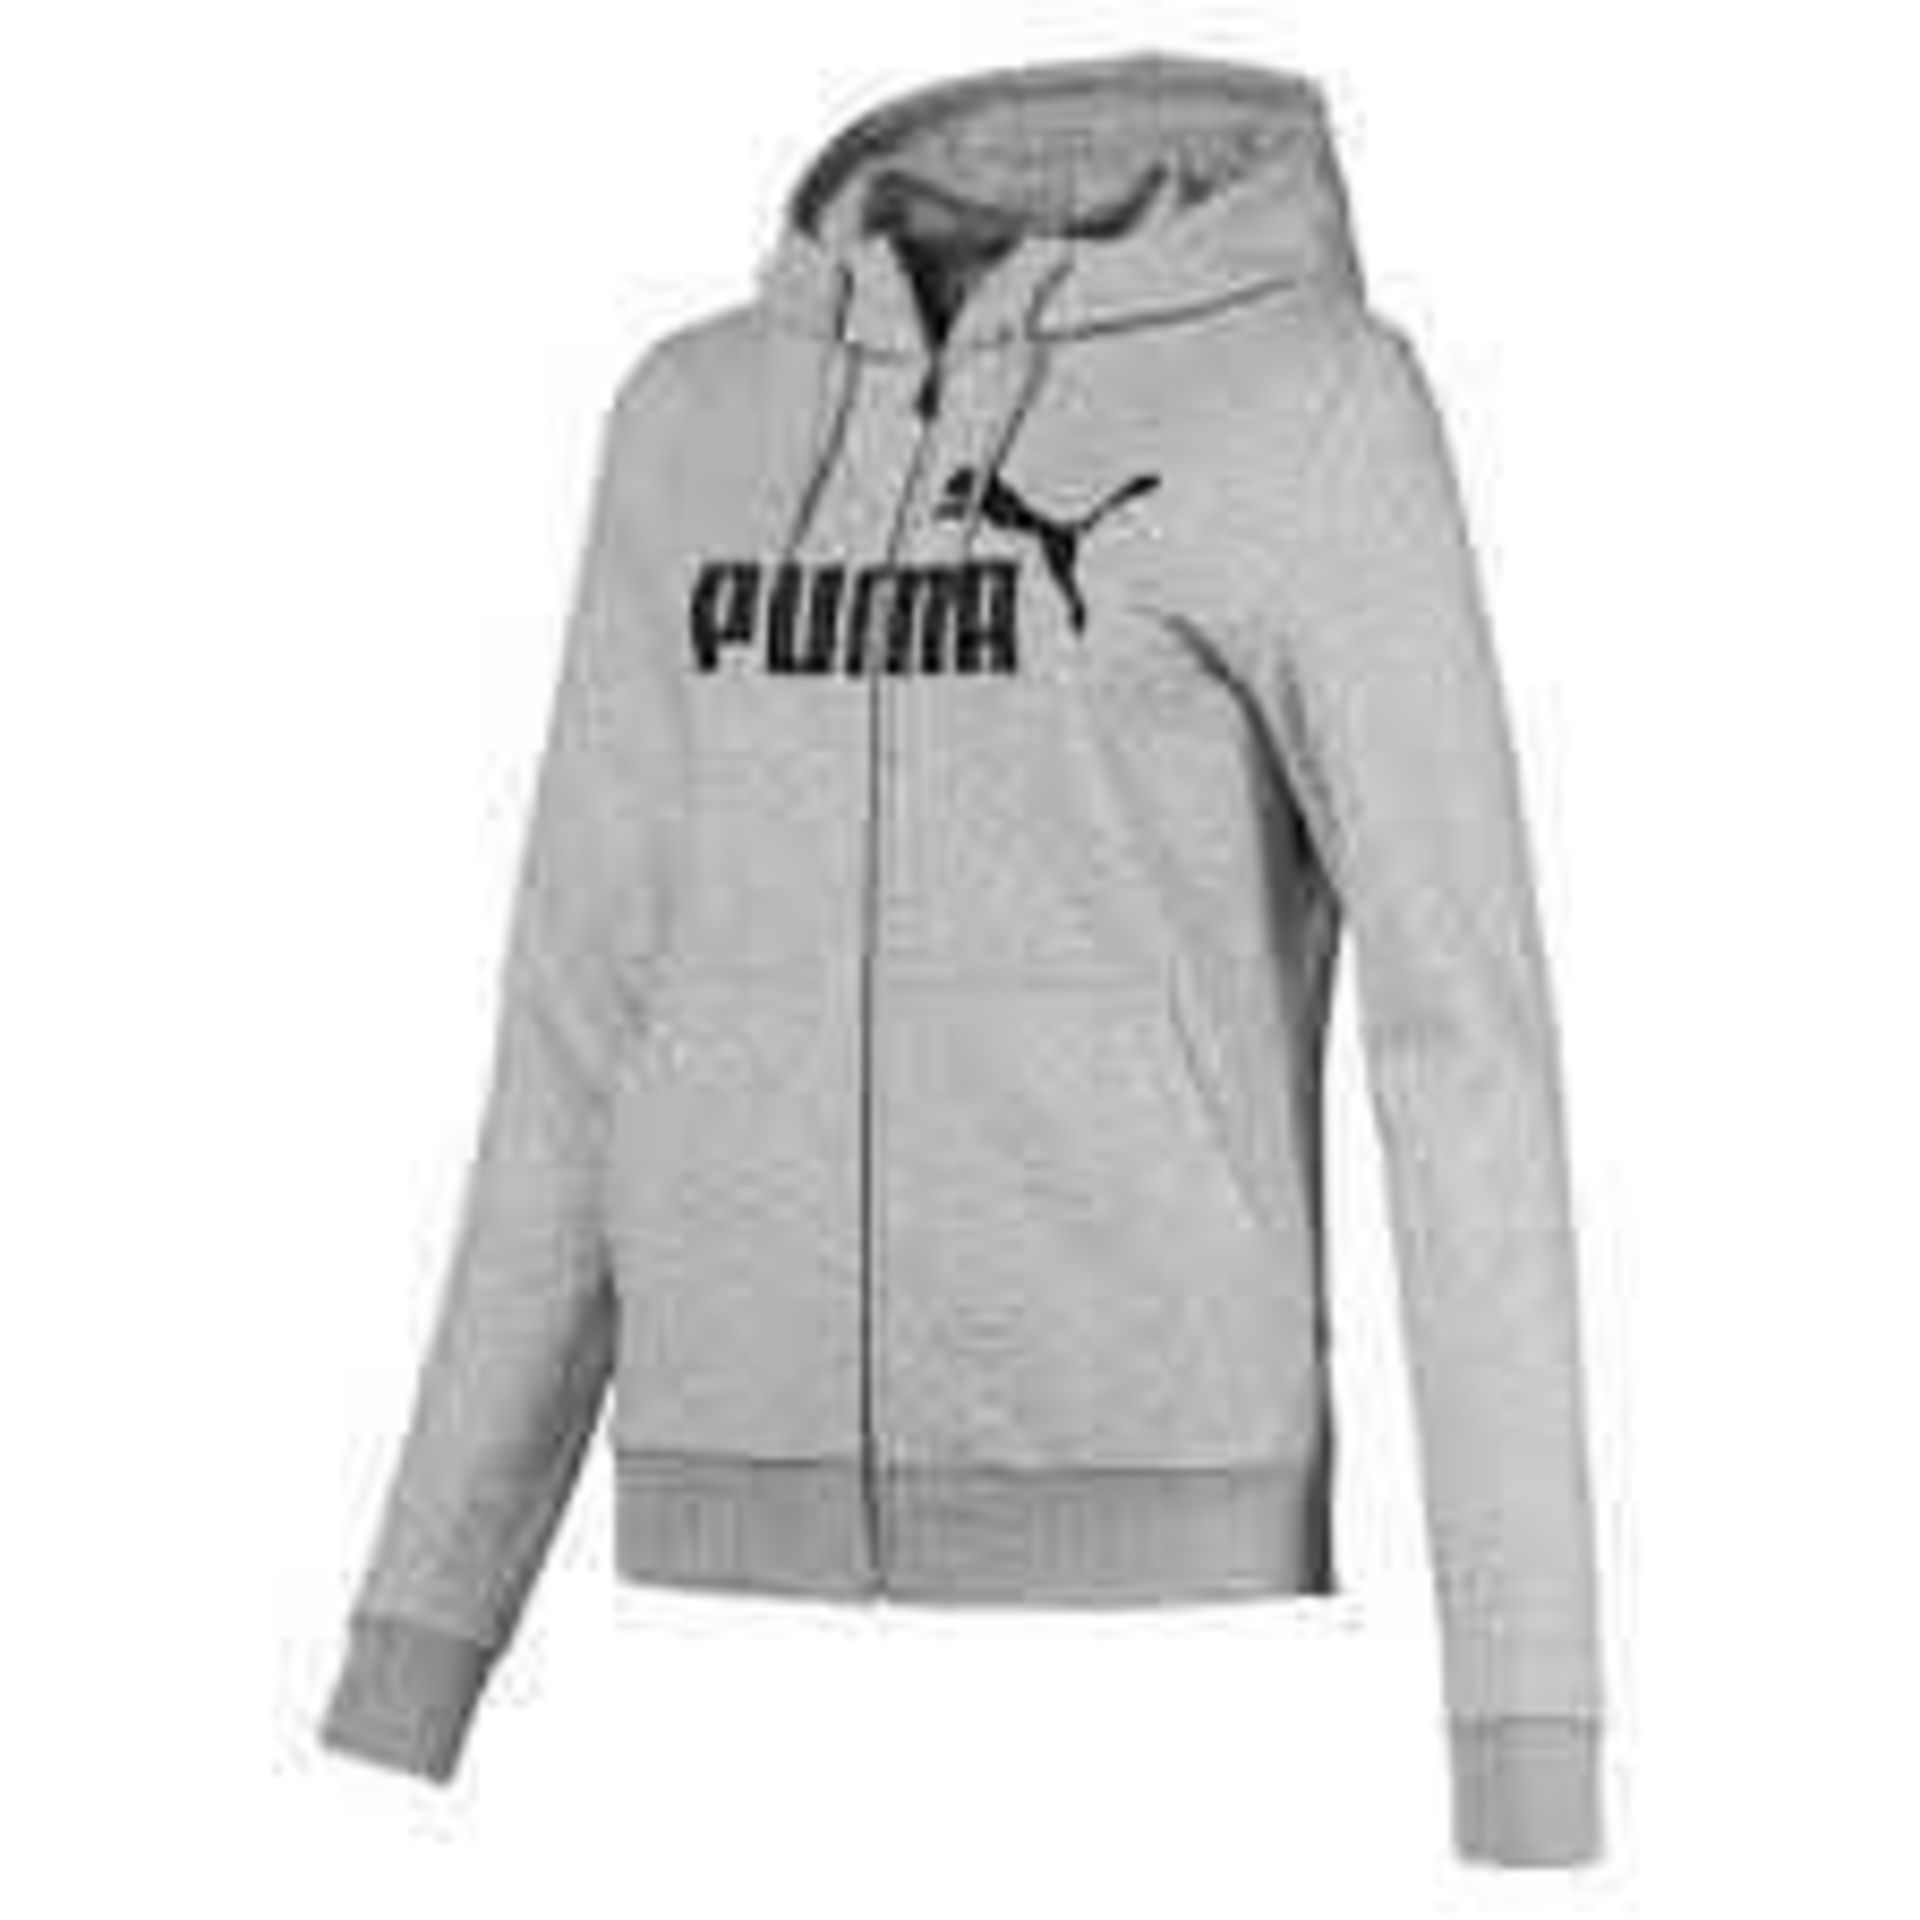 RRP £50 Aged 15-16 Puma Grey Zip Front Jacket 6.262 (Appraisals Available On Request) (Pictures